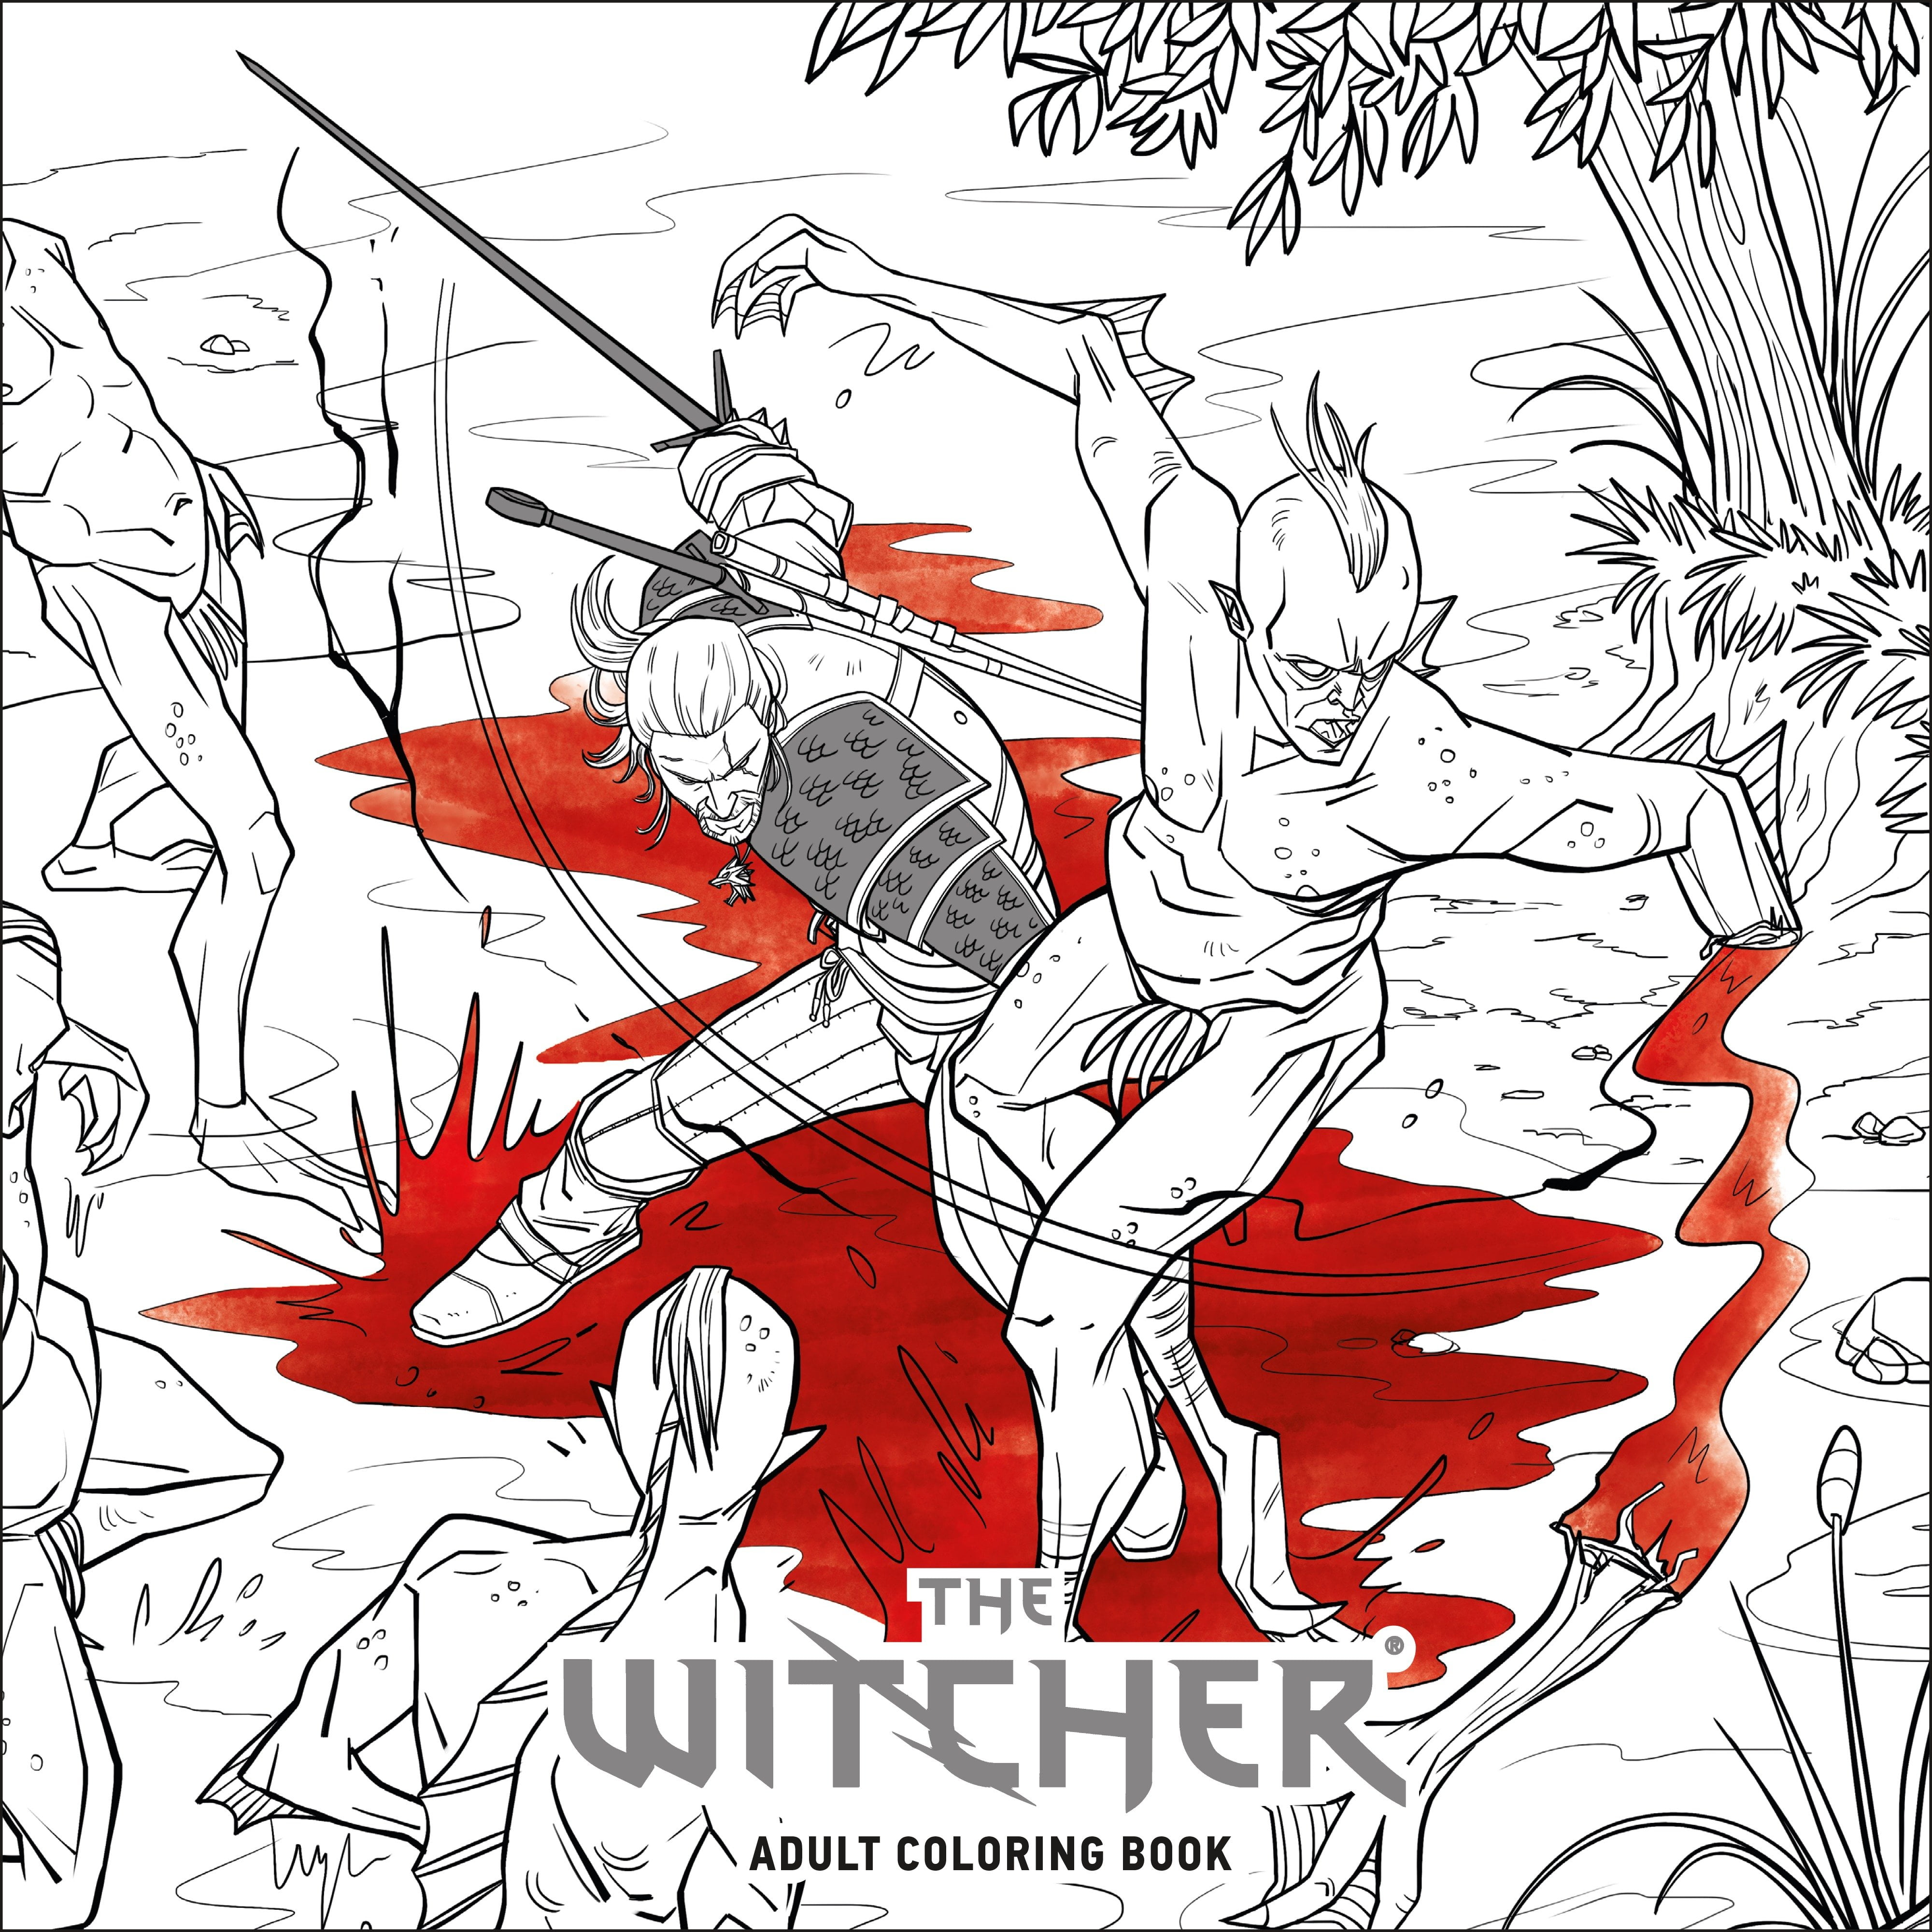 The Witcher Adult Coloring Book - Walmart.com